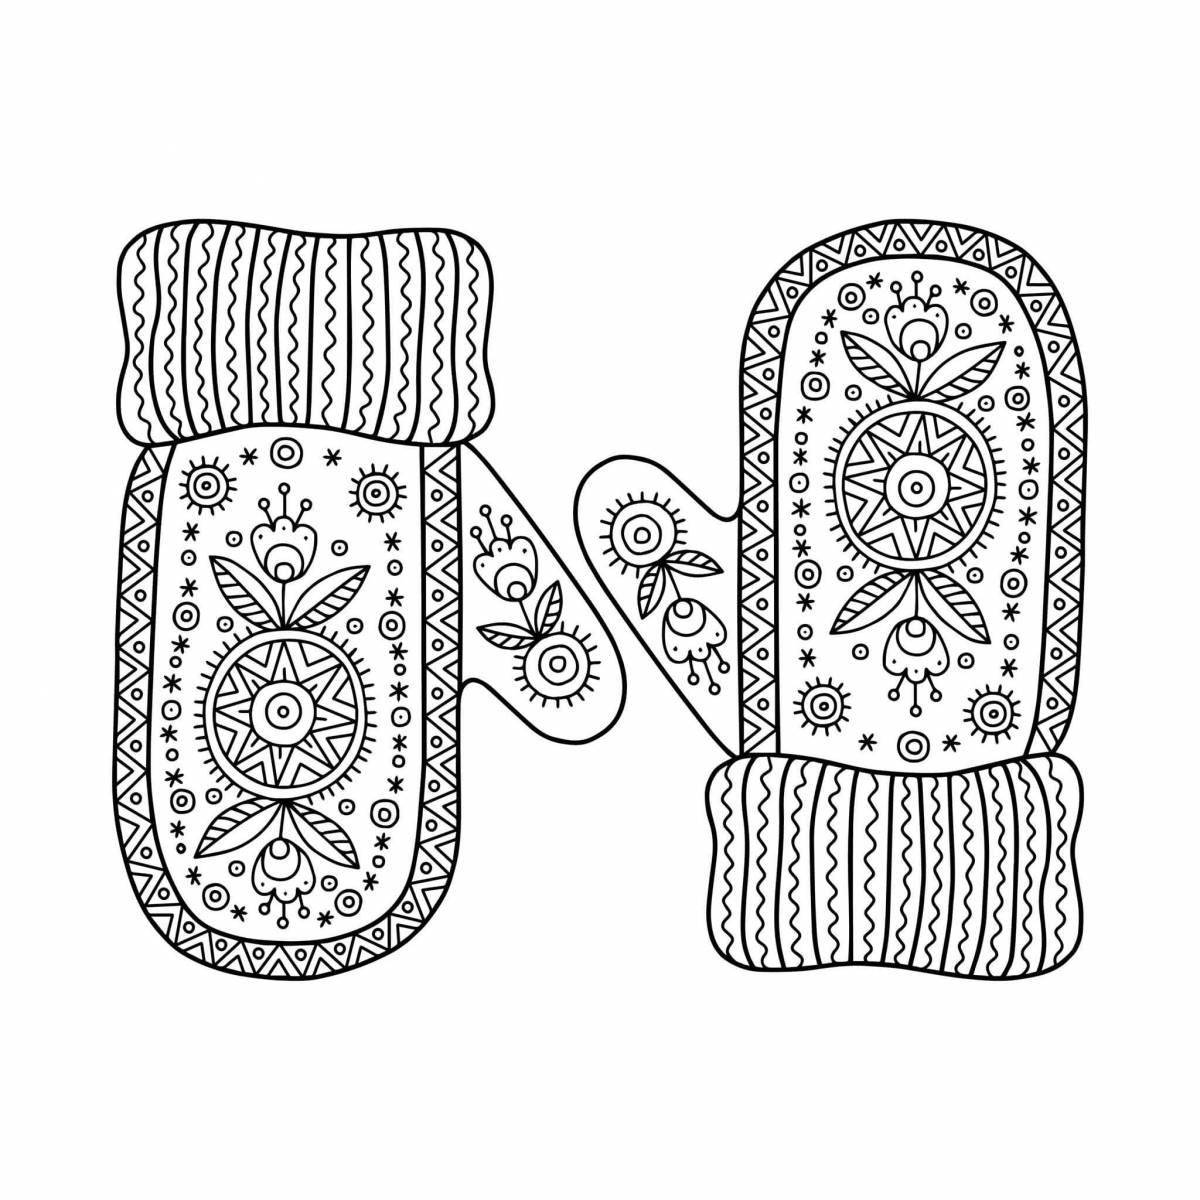 Coloring page inviting rubber mittens